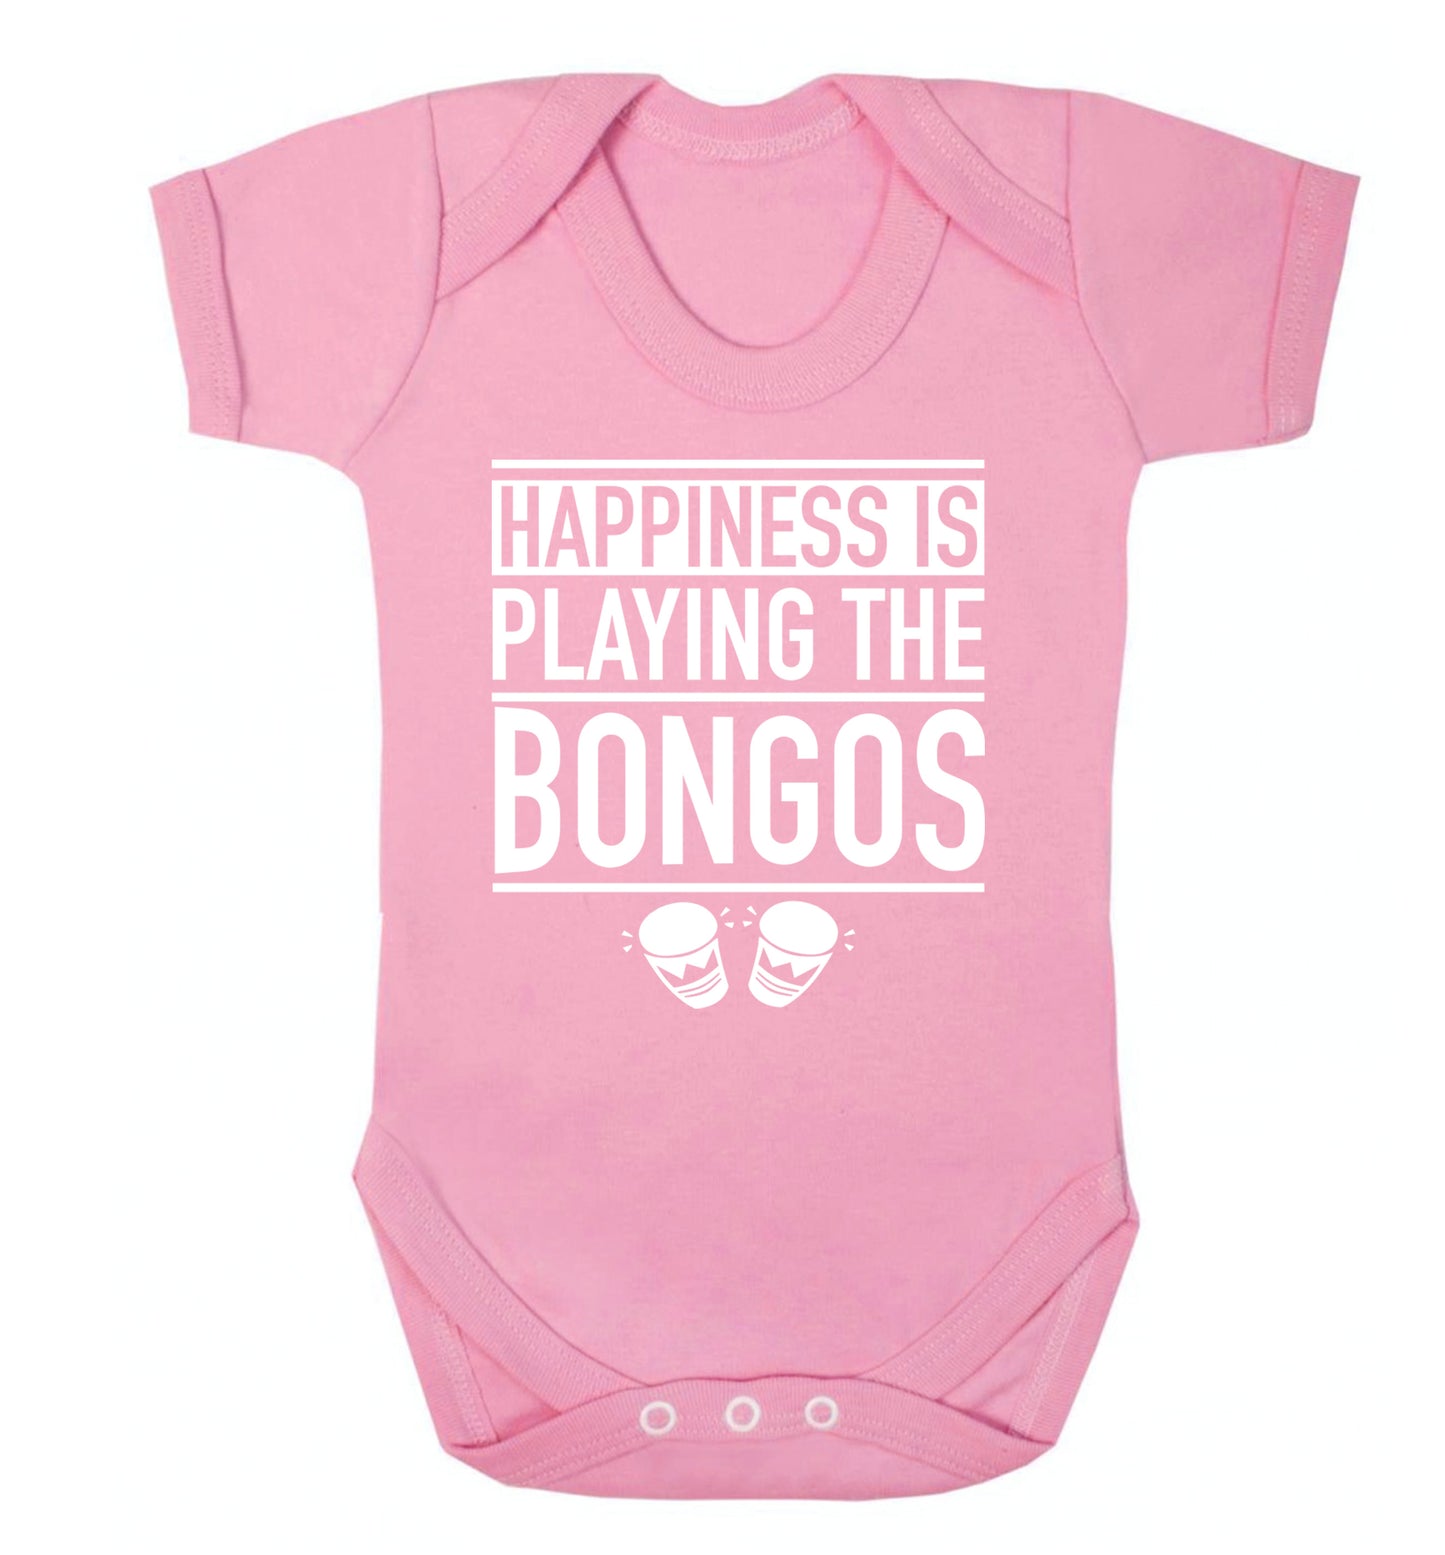 Happiness is playing the bongos Baby Vest pale pink 18-24 months